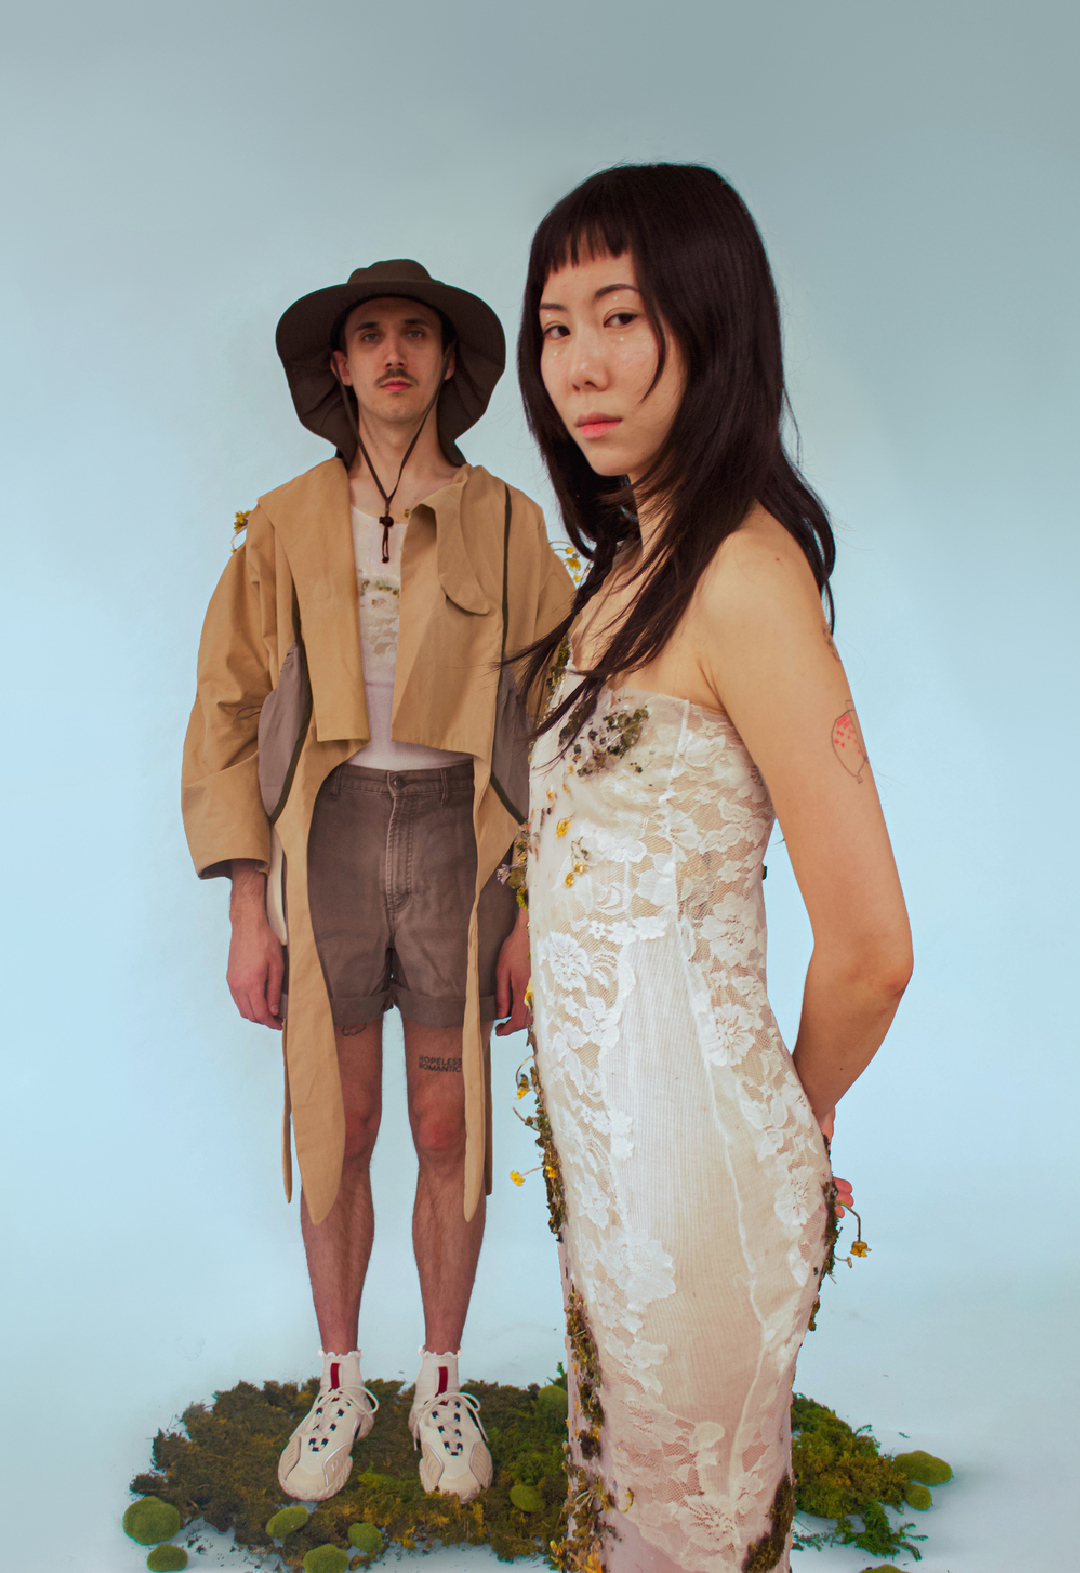 In this photo, the female model stands close to the camera, while the male model stands far behind. Although both models are looking at the camera, the female model has her body turned to the side while keeping her eyes on the camera.